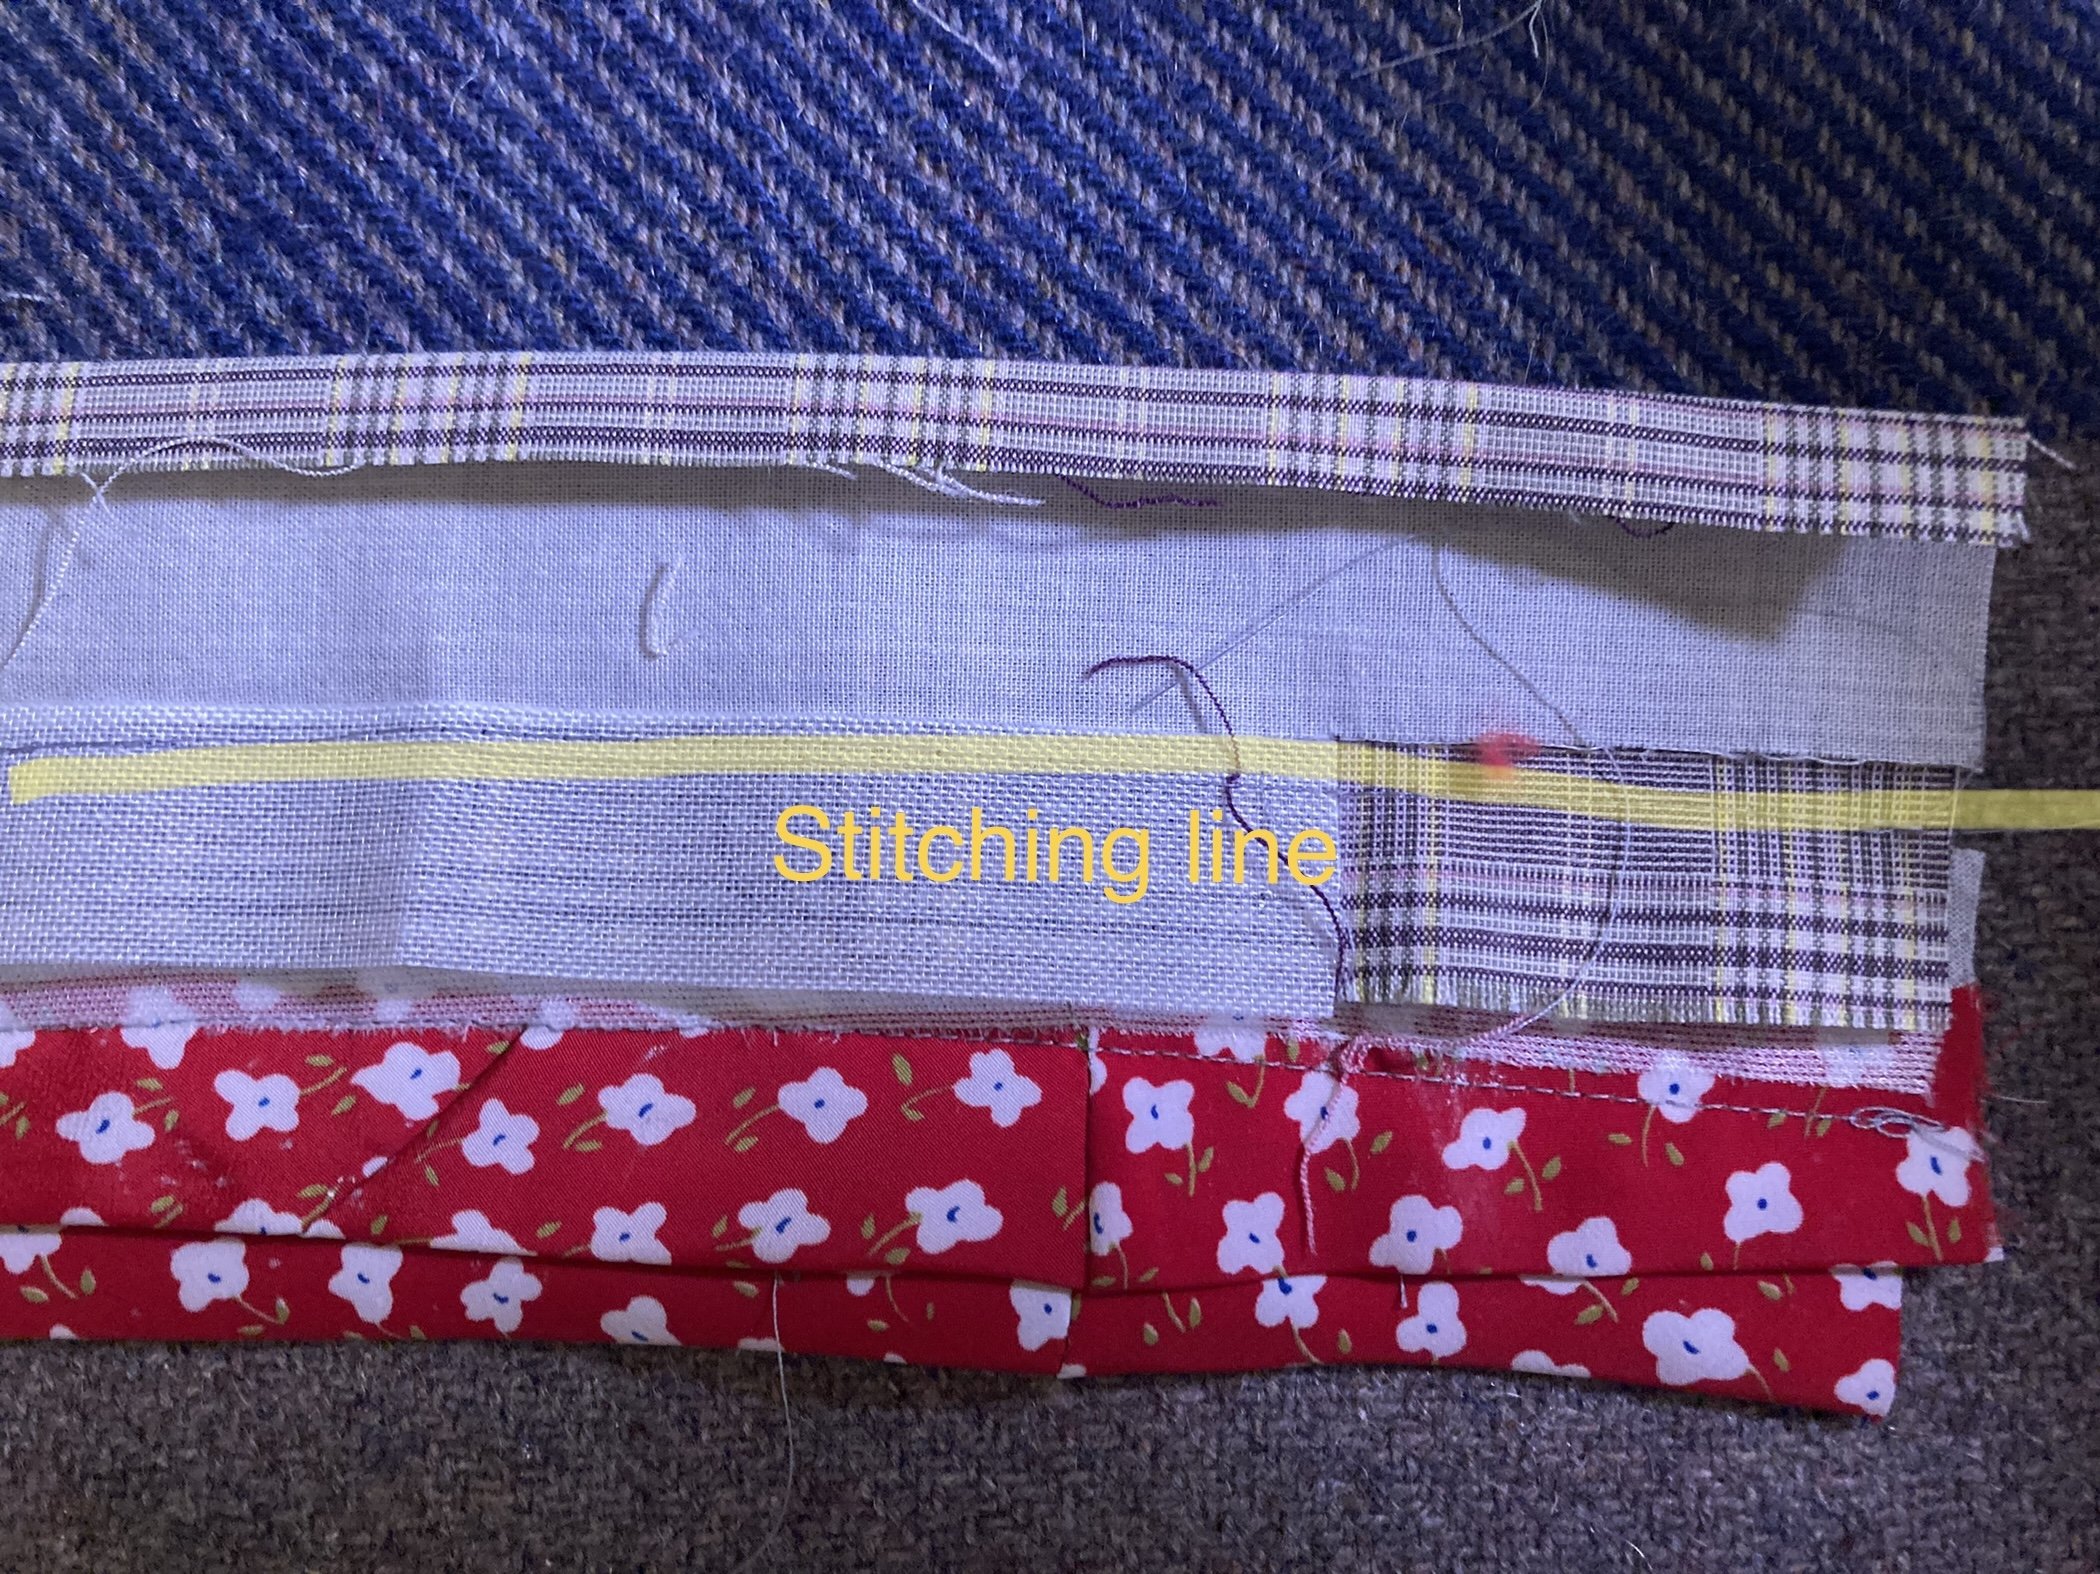 Wrong side waistband, stitching line roughly highlighted